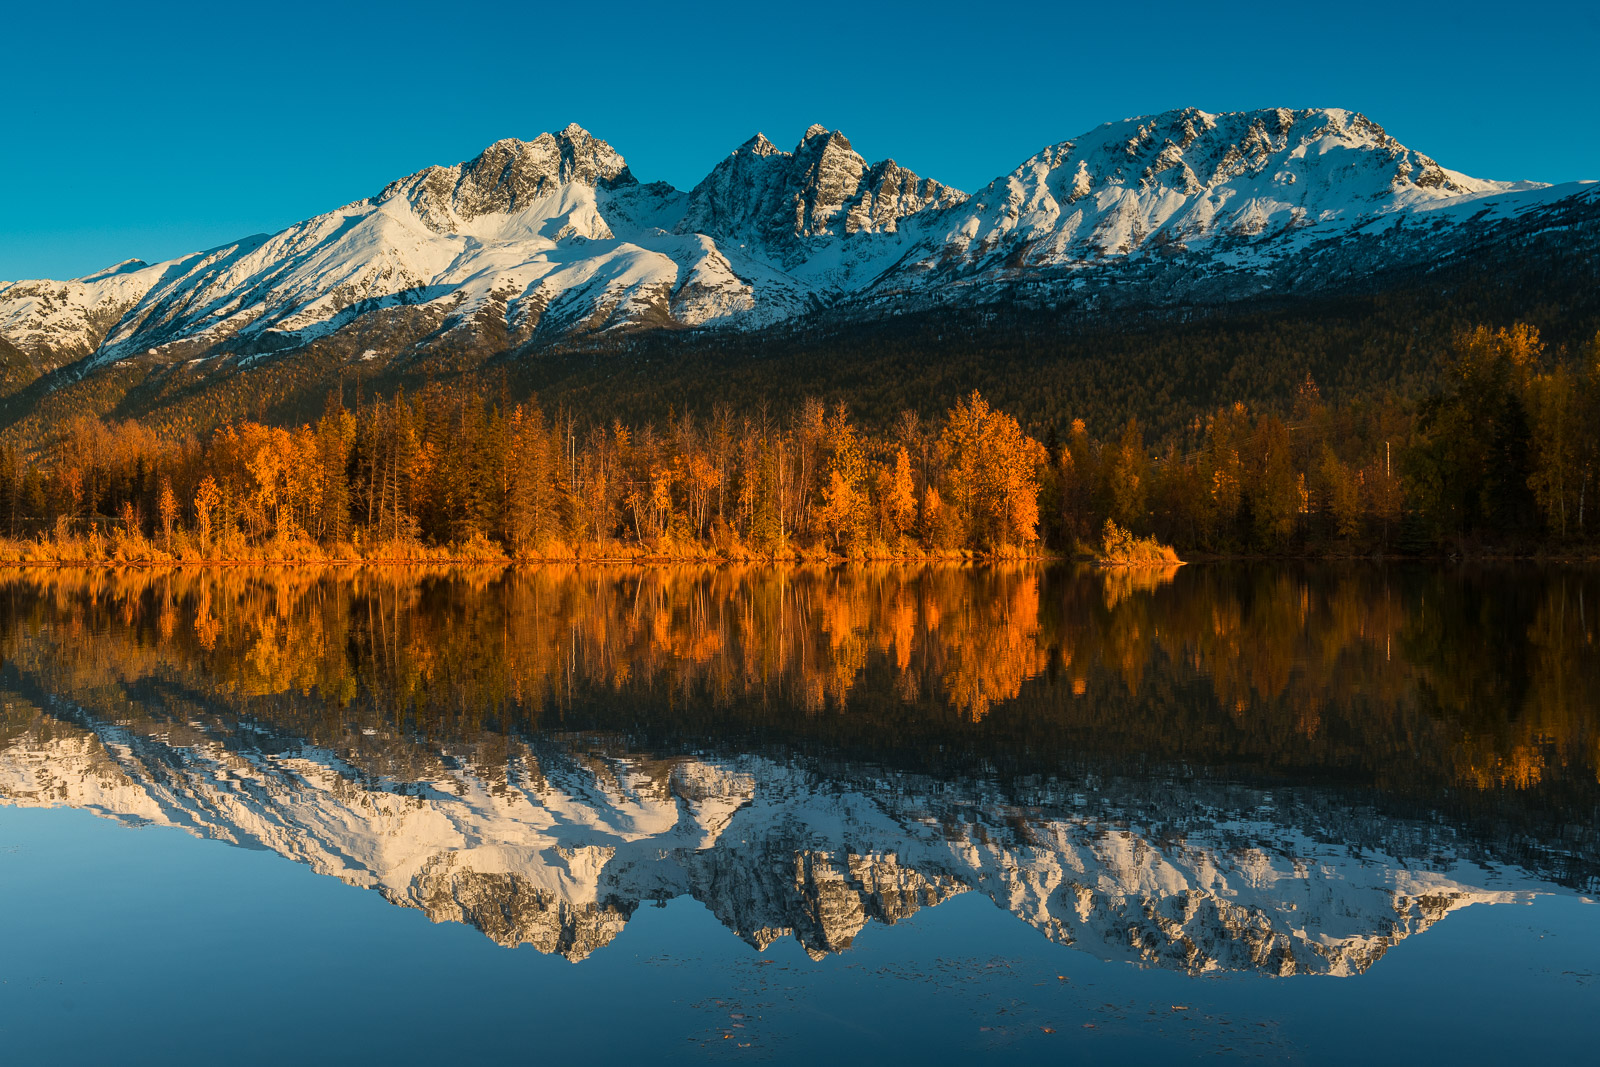 Twin Peaks of the Chugach Mountains reflects in the calm surface of Reflections Lake near the Knik River.